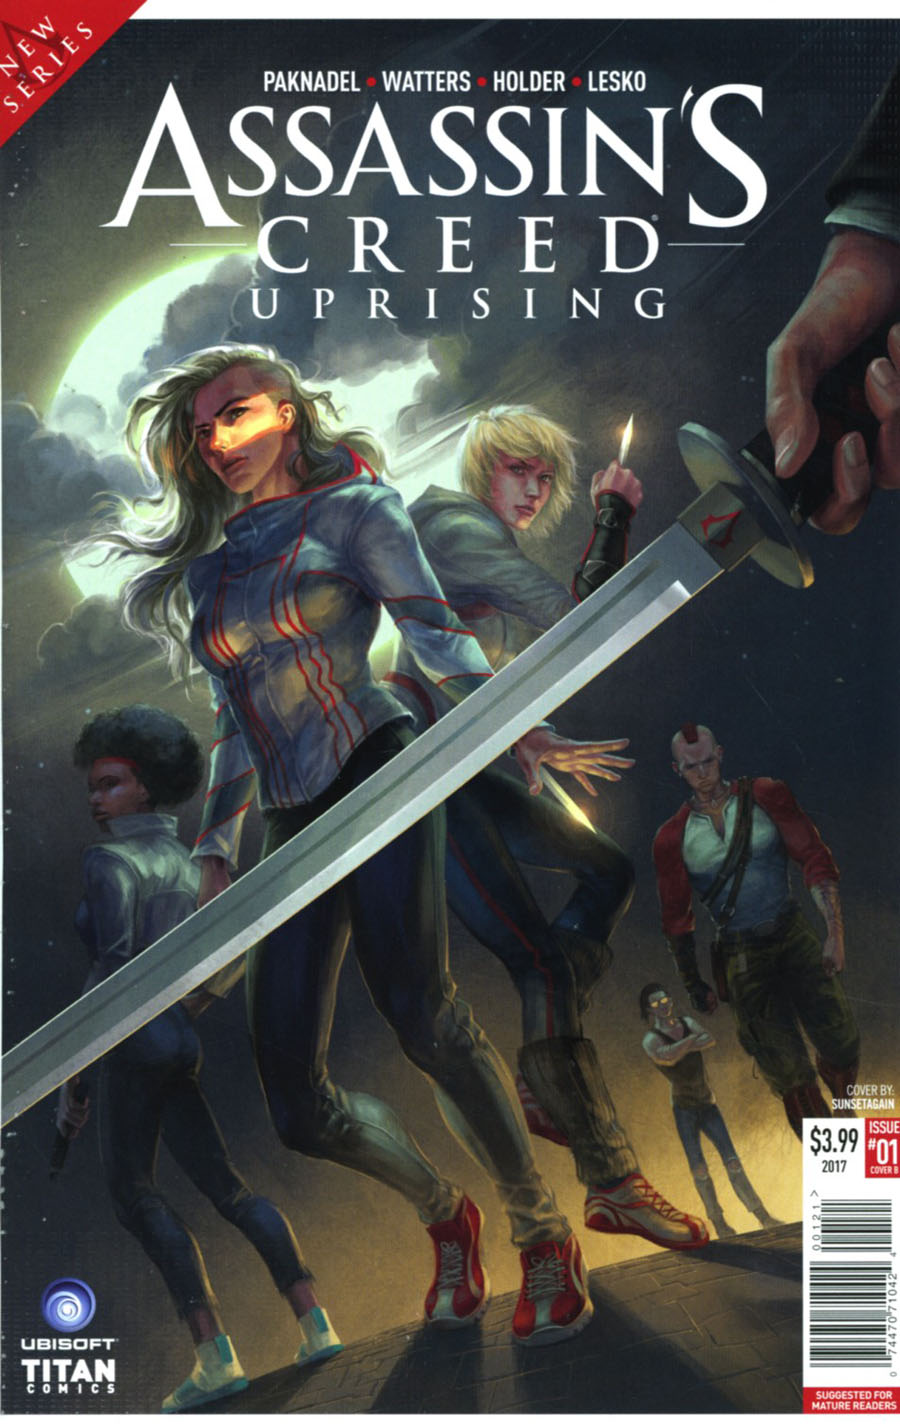 Assassins Creed Uprising #1 Cover B Variant Sunsetagain Cover